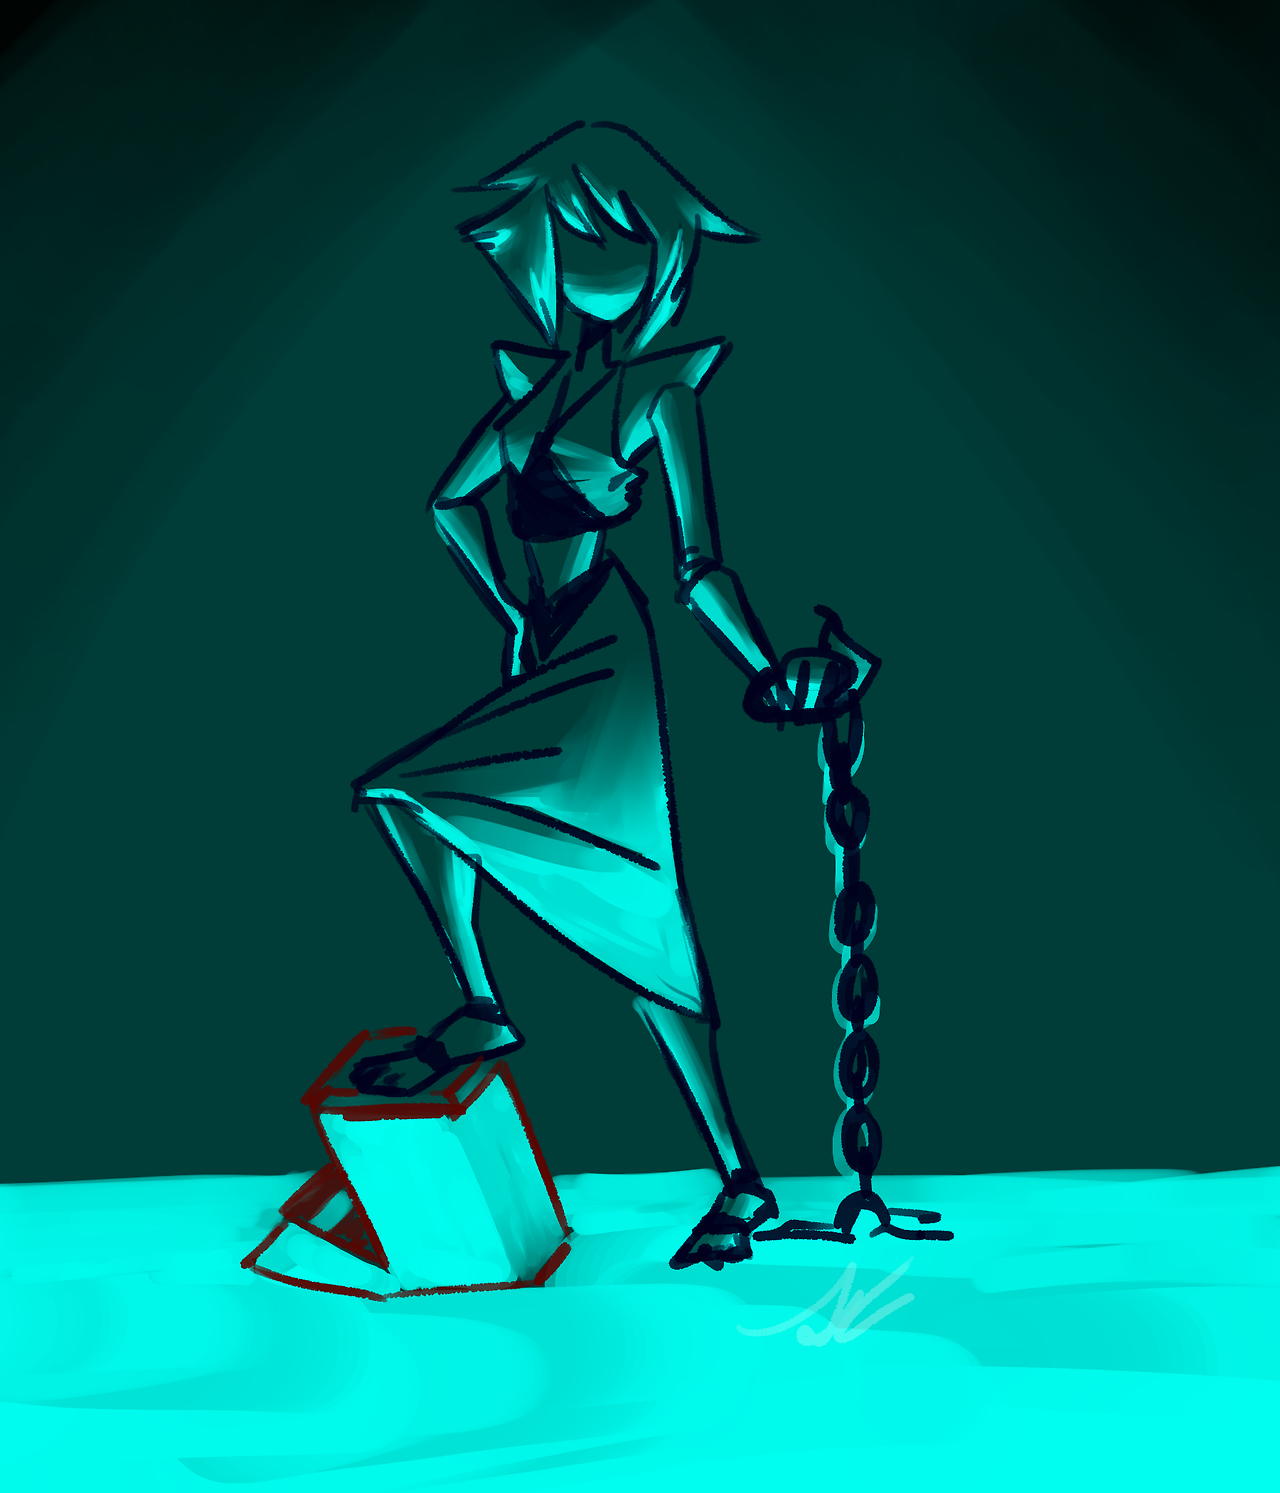 VEEERY old lapis sketch i finished during the ig livestream! i wasn’t really sure what i had been thinking when i originally drew it up but i thought cool teal under-lighting shit looked pretty cool